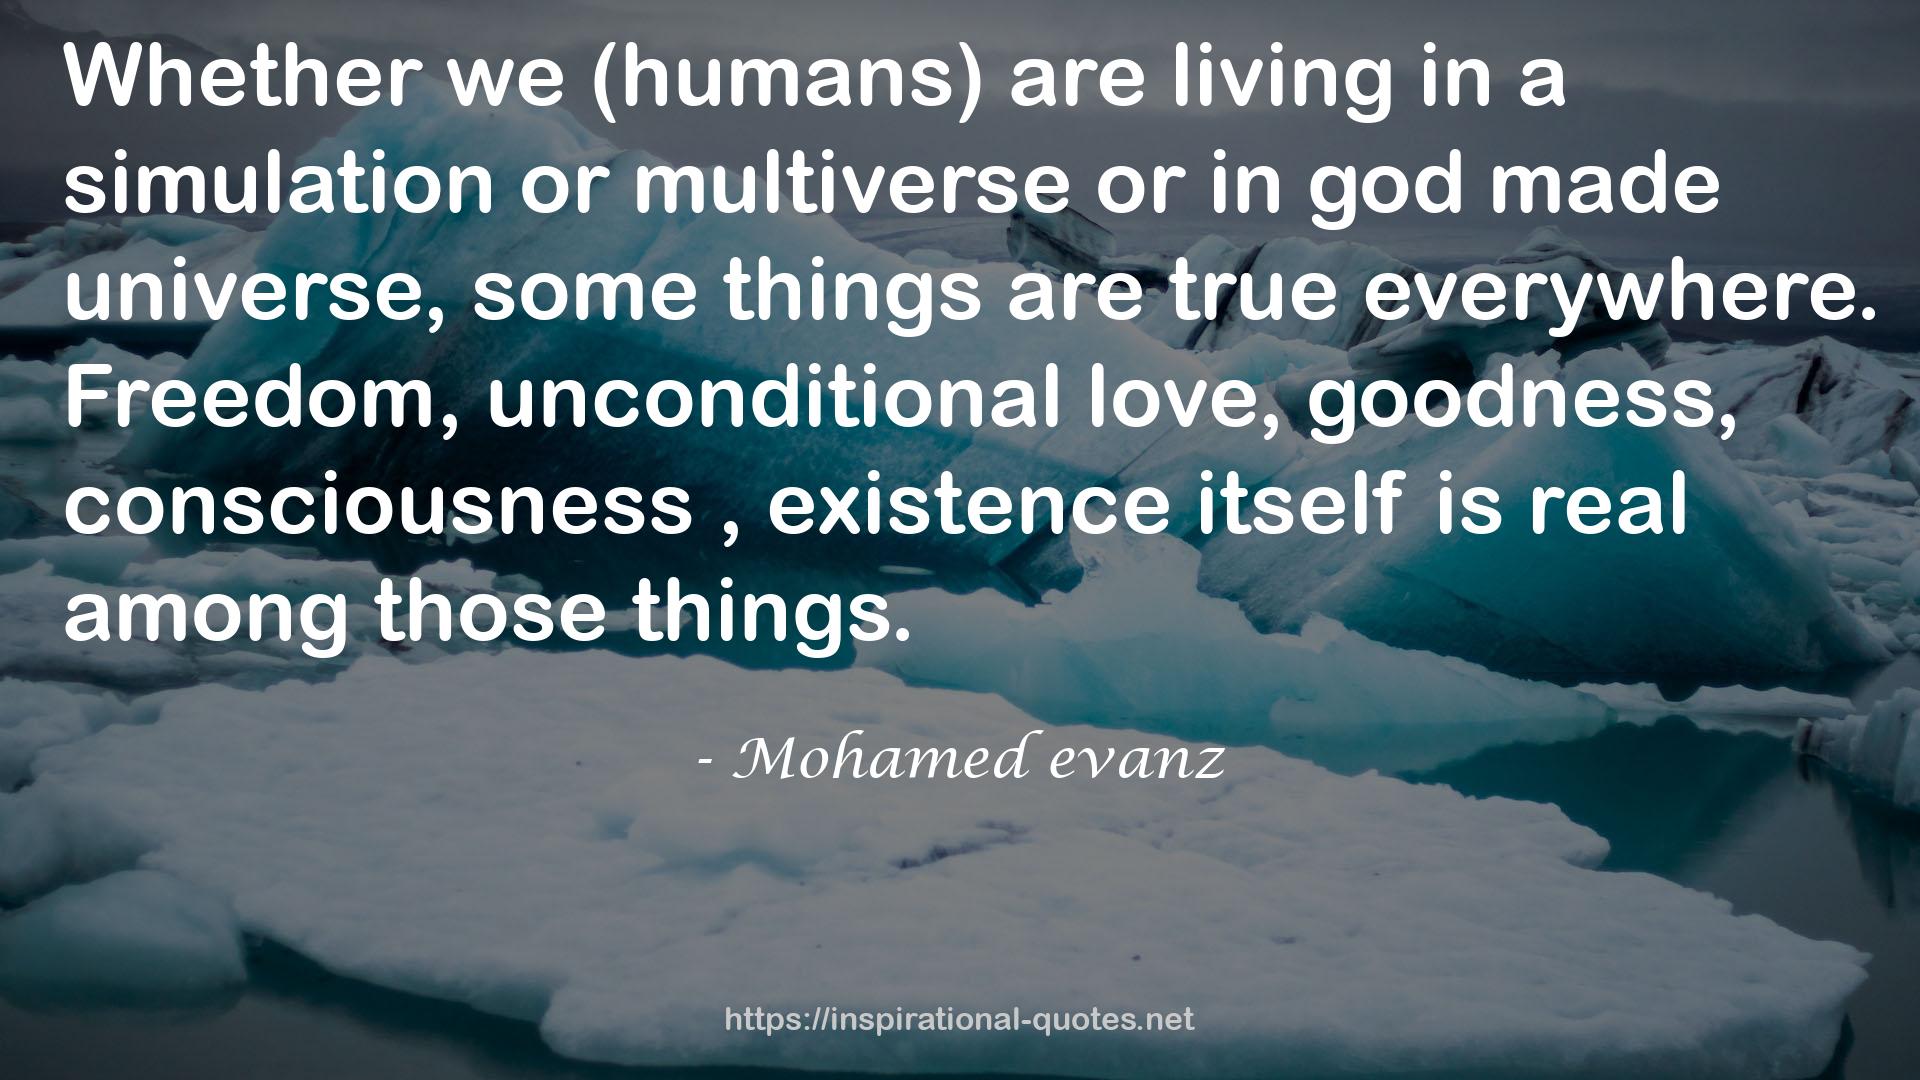 Mohamed evanz QUOTES